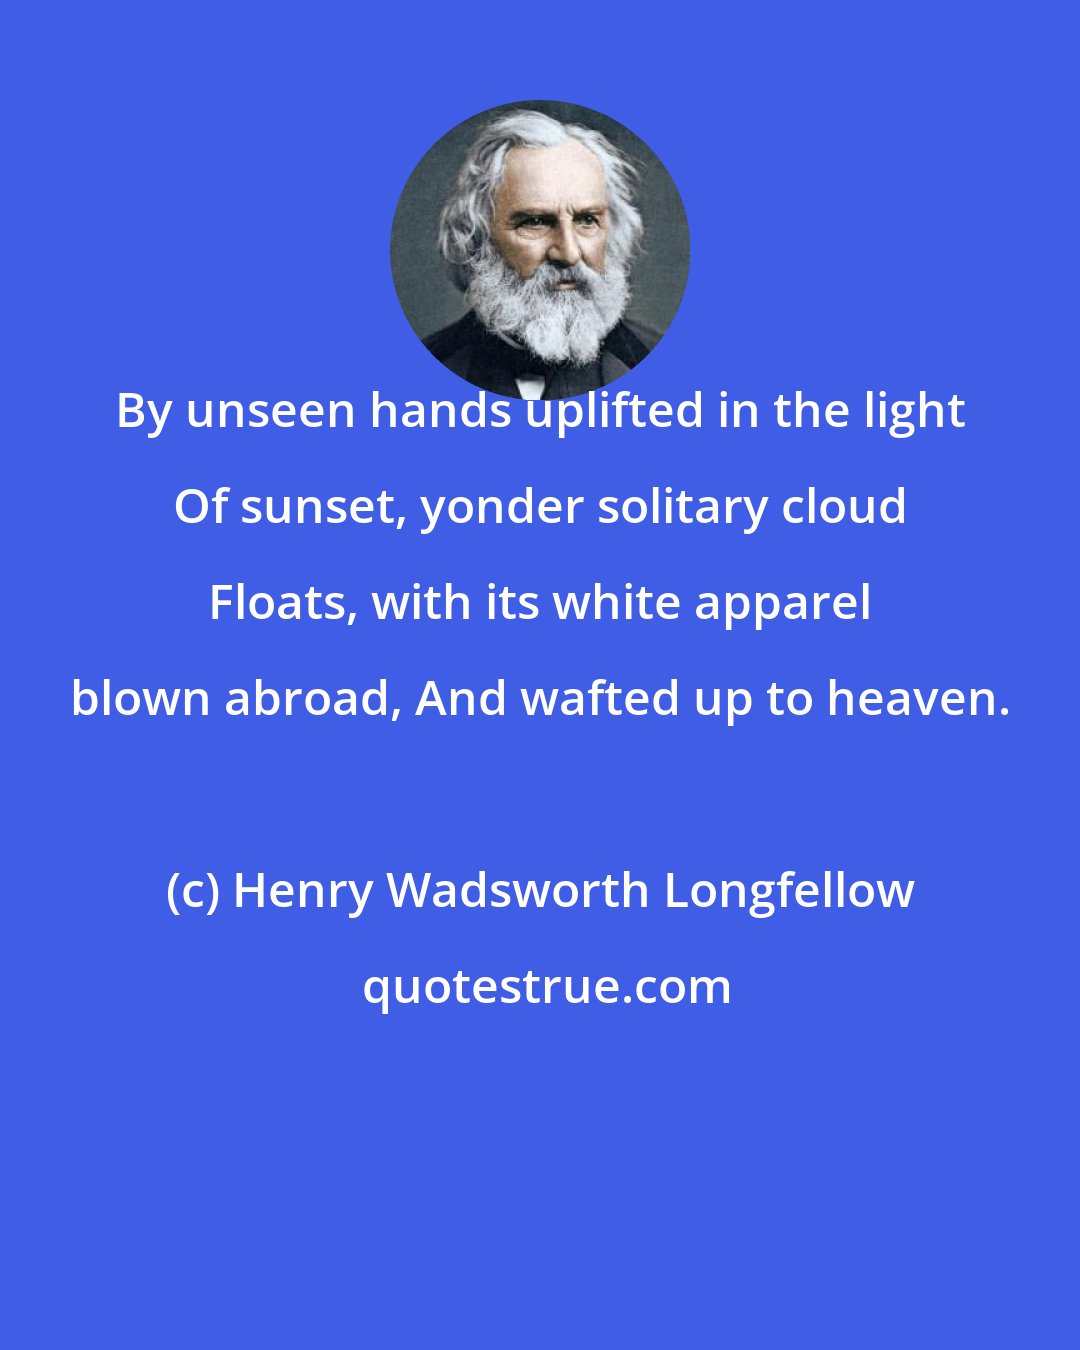 Henry Wadsworth Longfellow: By unseen hands uplifted in the light Of sunset, yonder solitary cloud Floats, with its white apparel blown abroad, And wafted up to heaven.